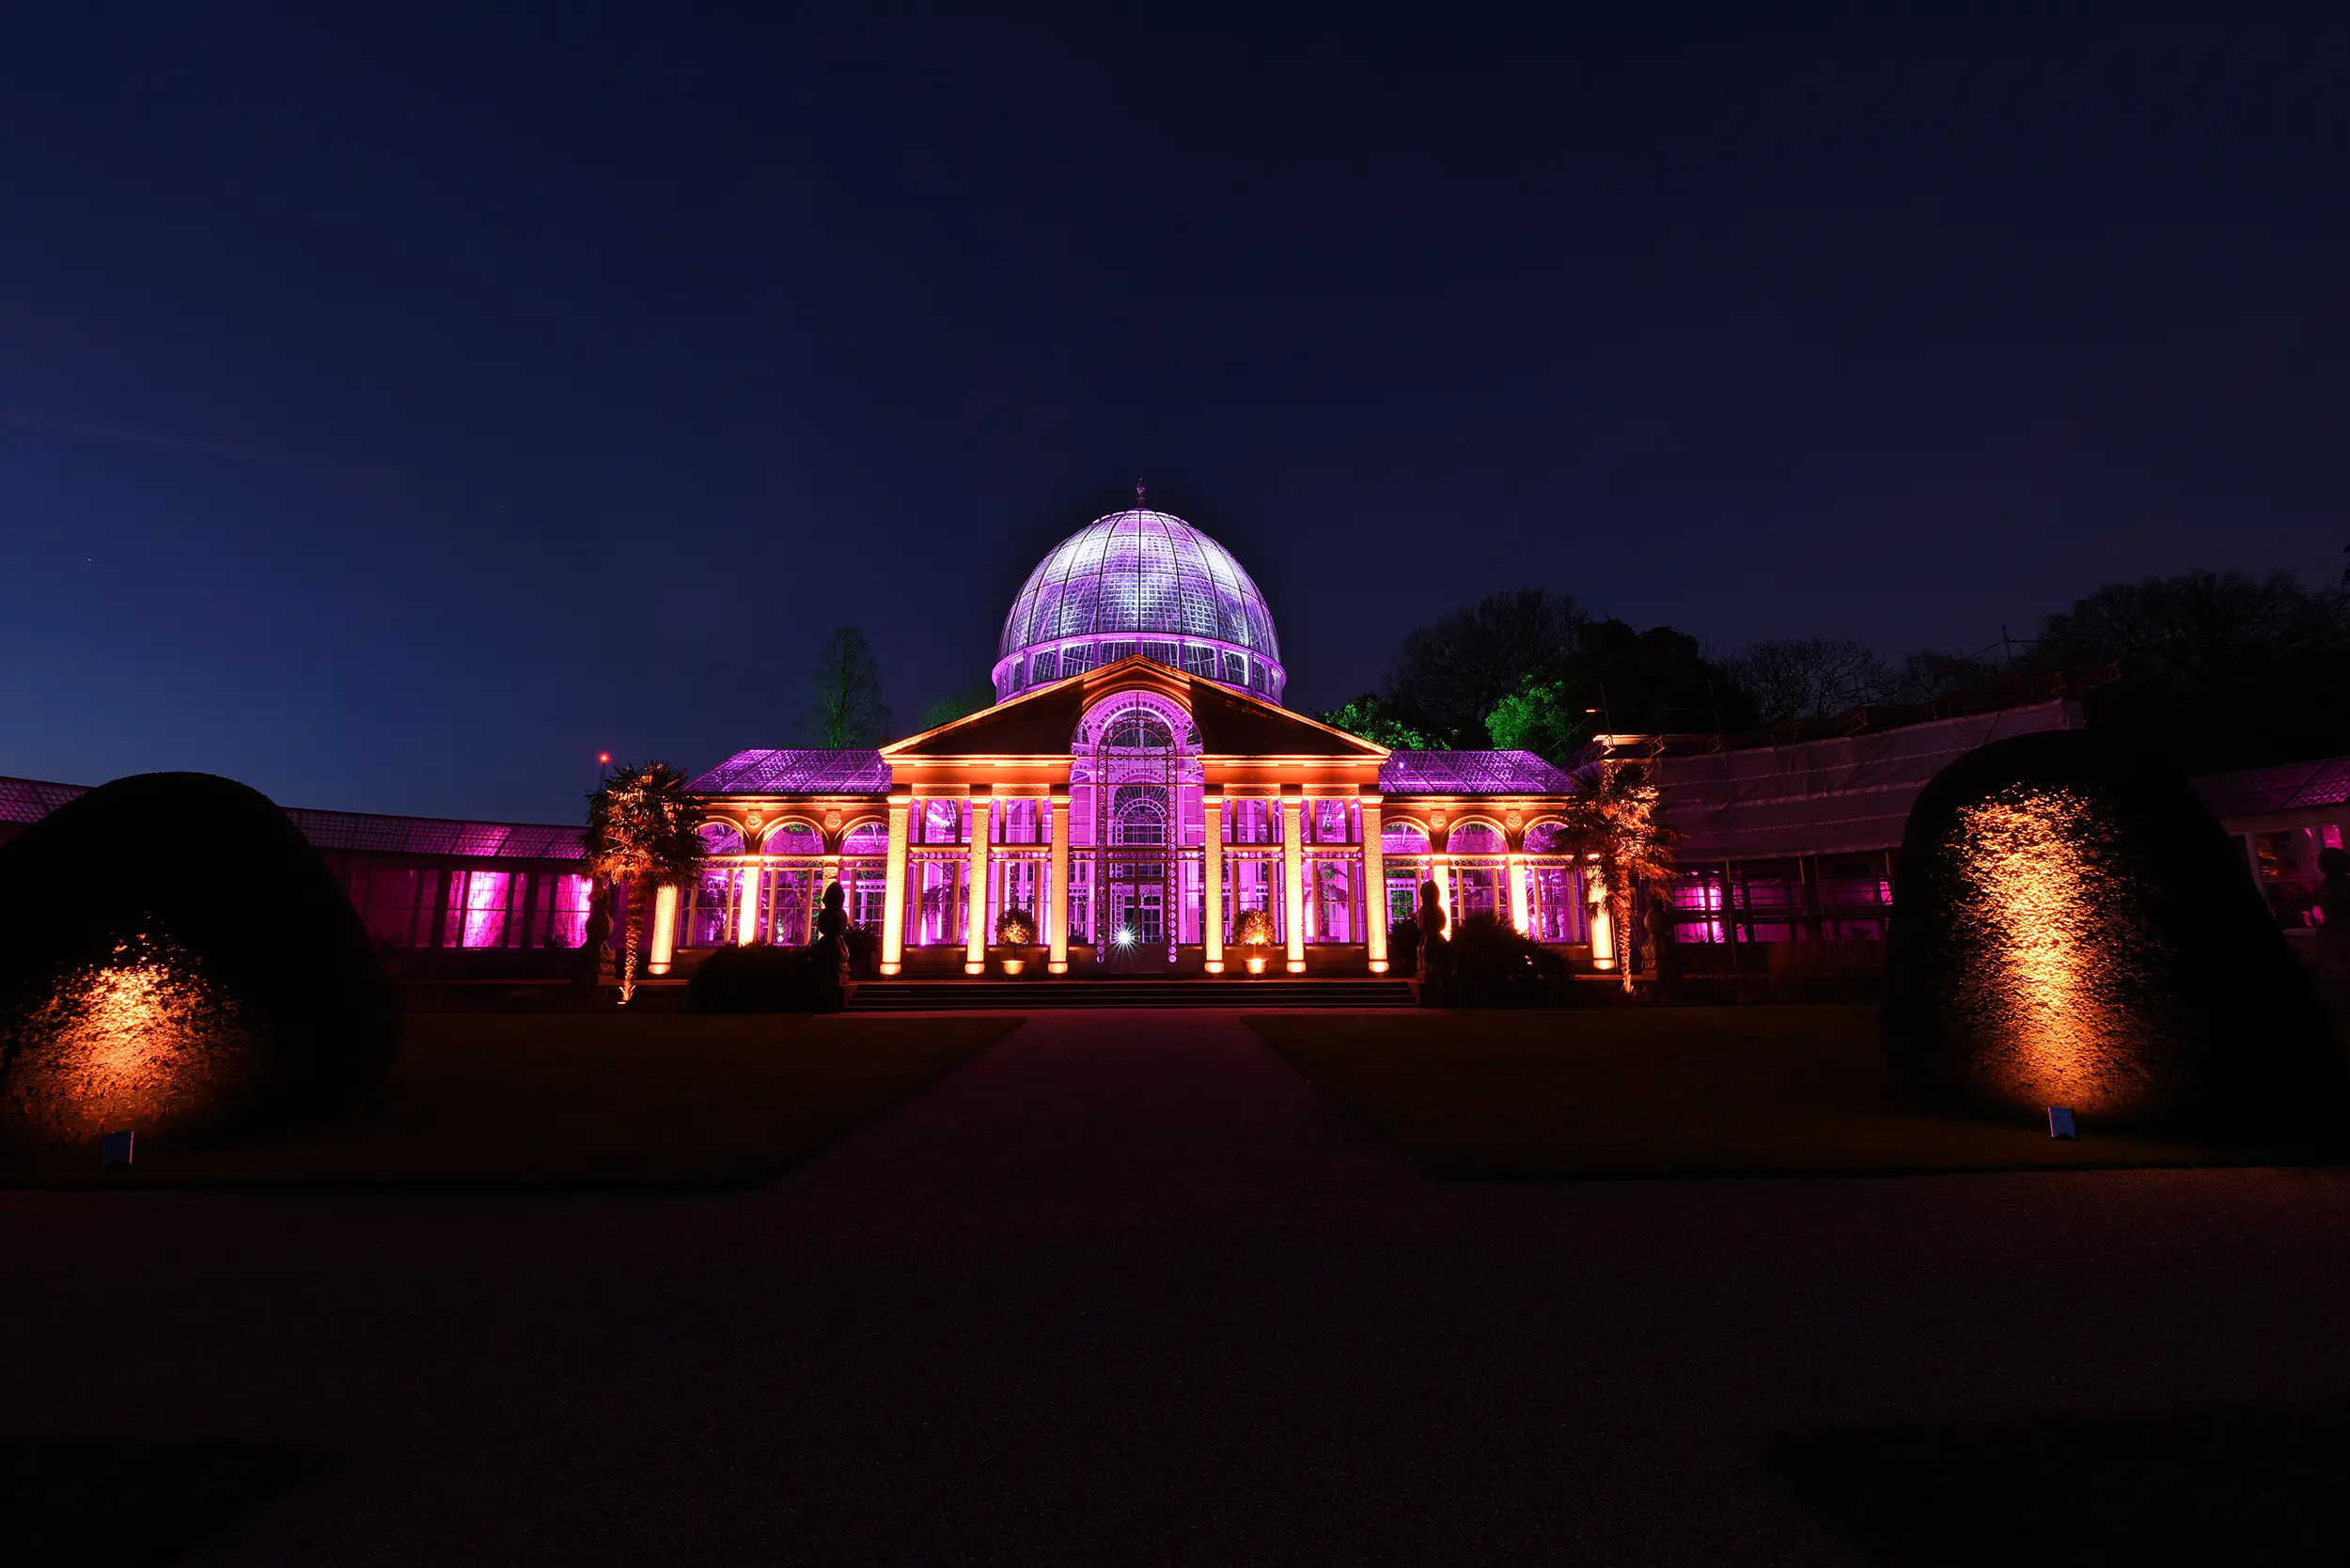 The Conservatory at Syon Park